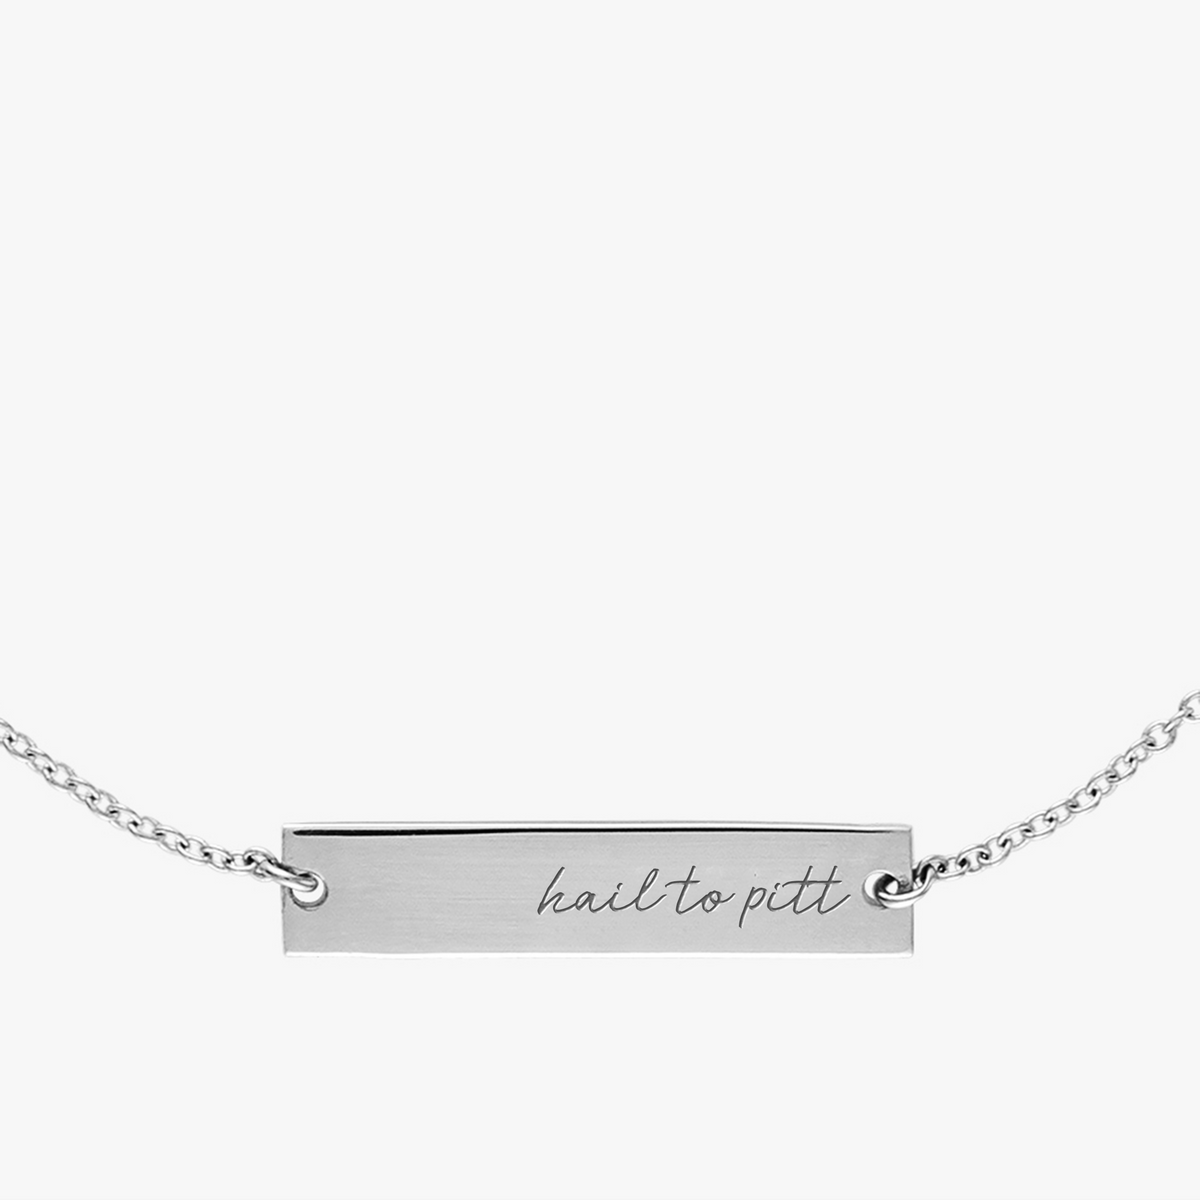 Pittsburgh University Horizontal Necklace Sterling Silver Close Up